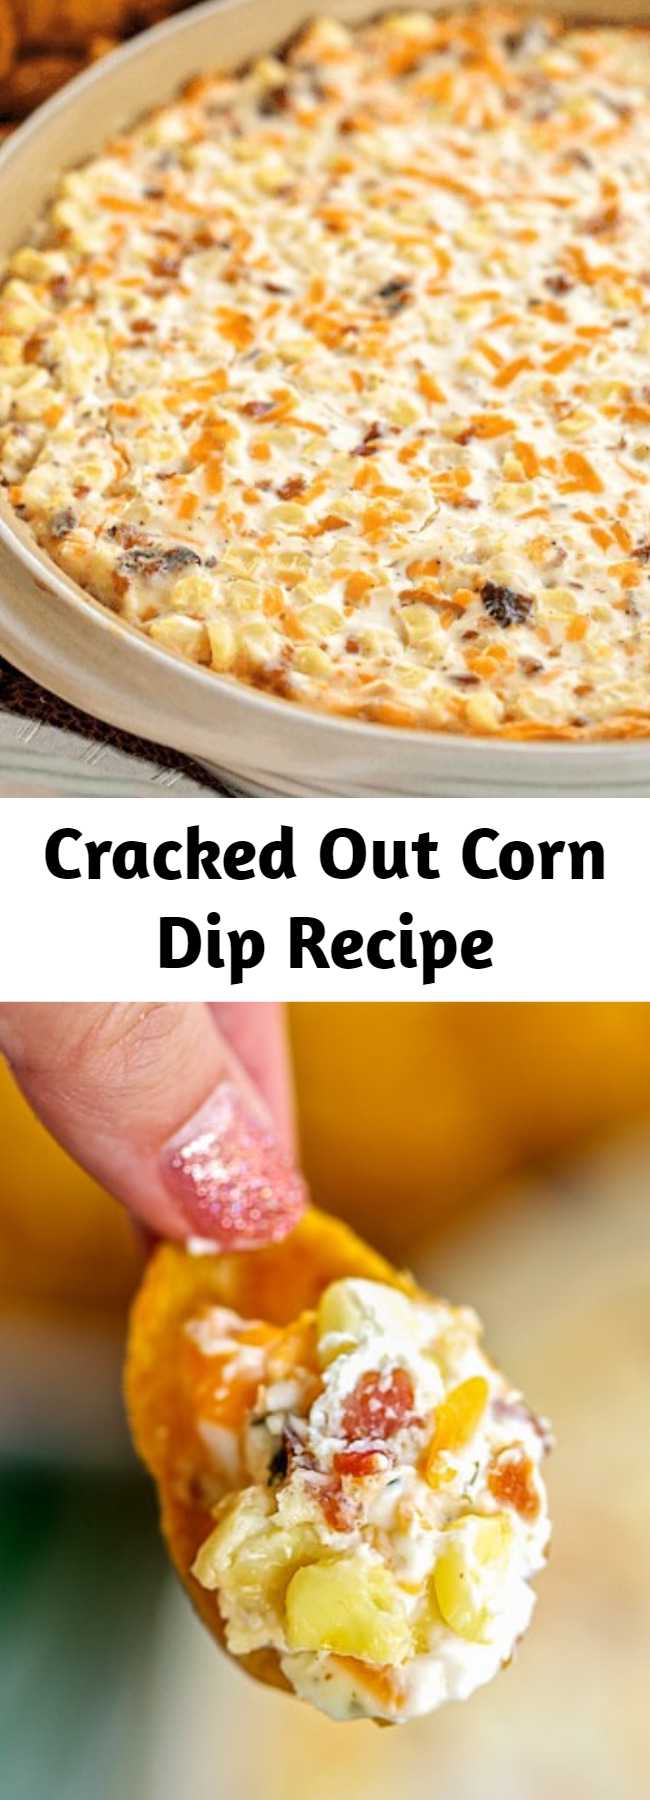 Easy Cracked Out Corn Dip Recipe – Mom Secret Ingrediets